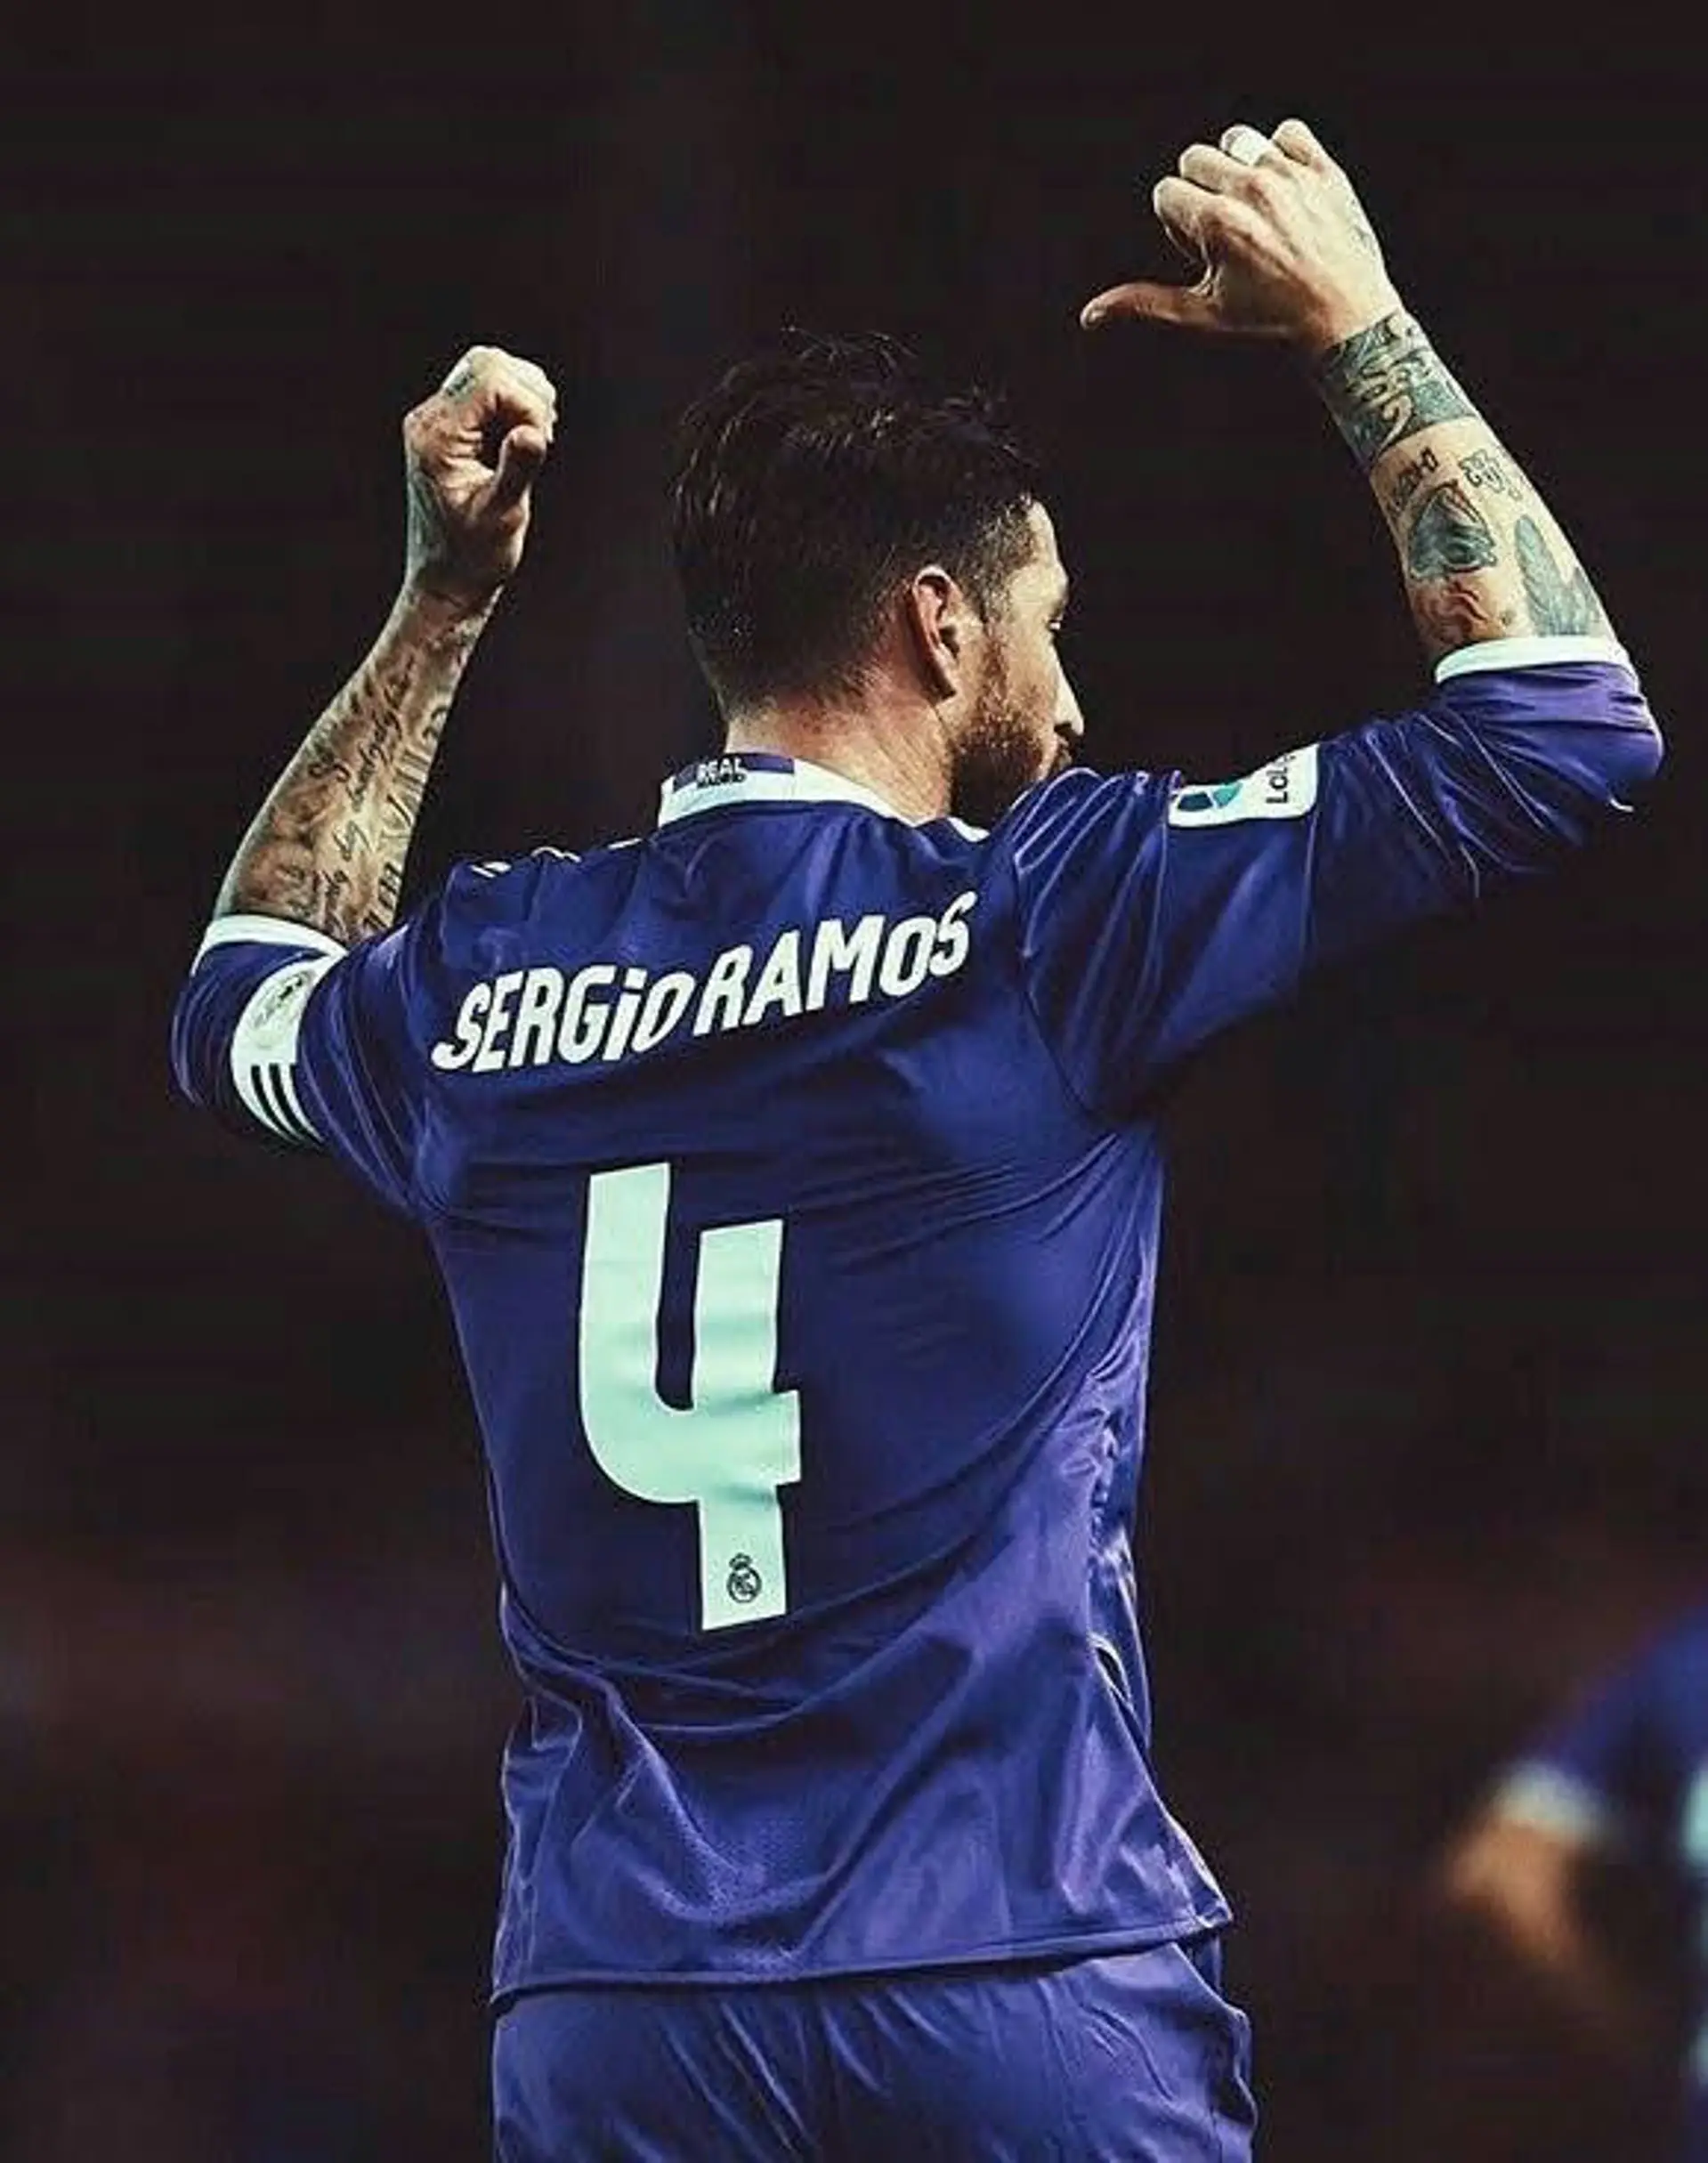 SERGIO RAMOS, the Most Real Madrid Legendary player of his generation.